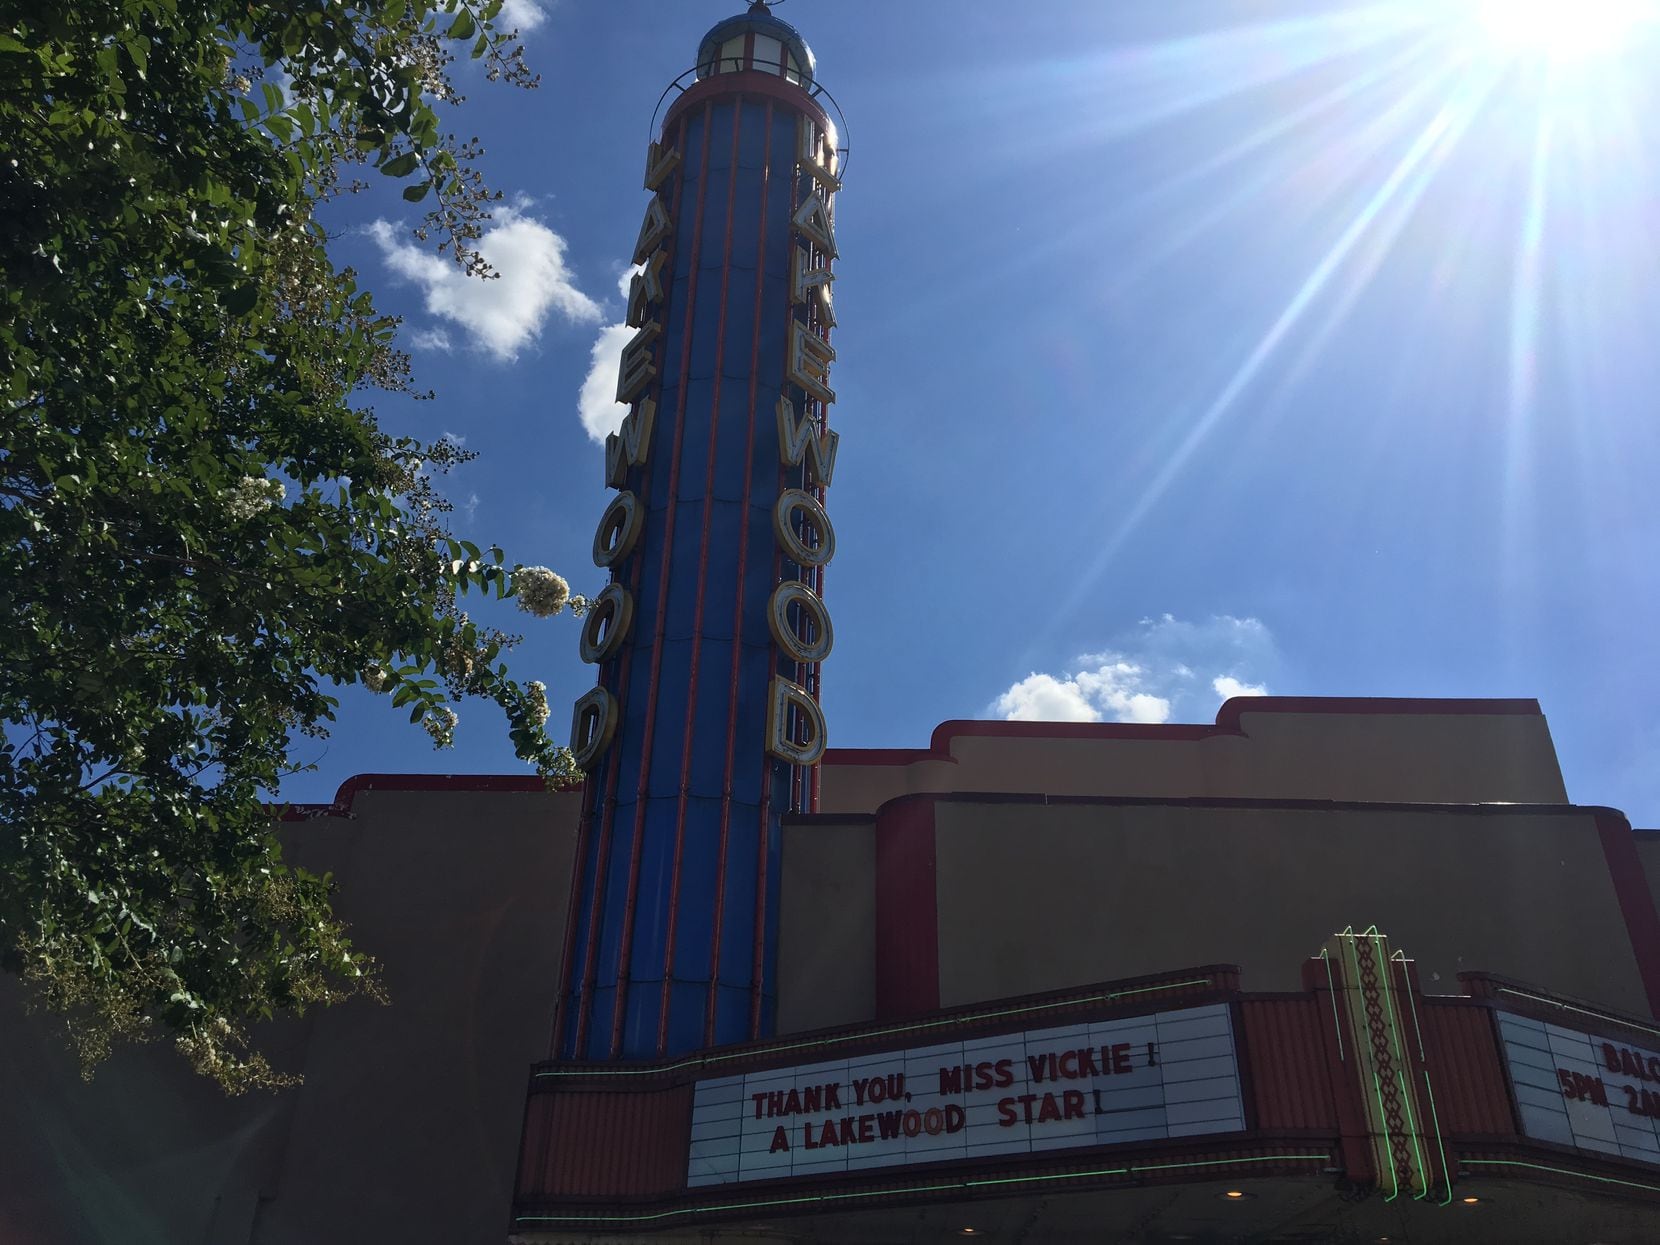 Lakewood Theater honored Vickie Thompson after her death.